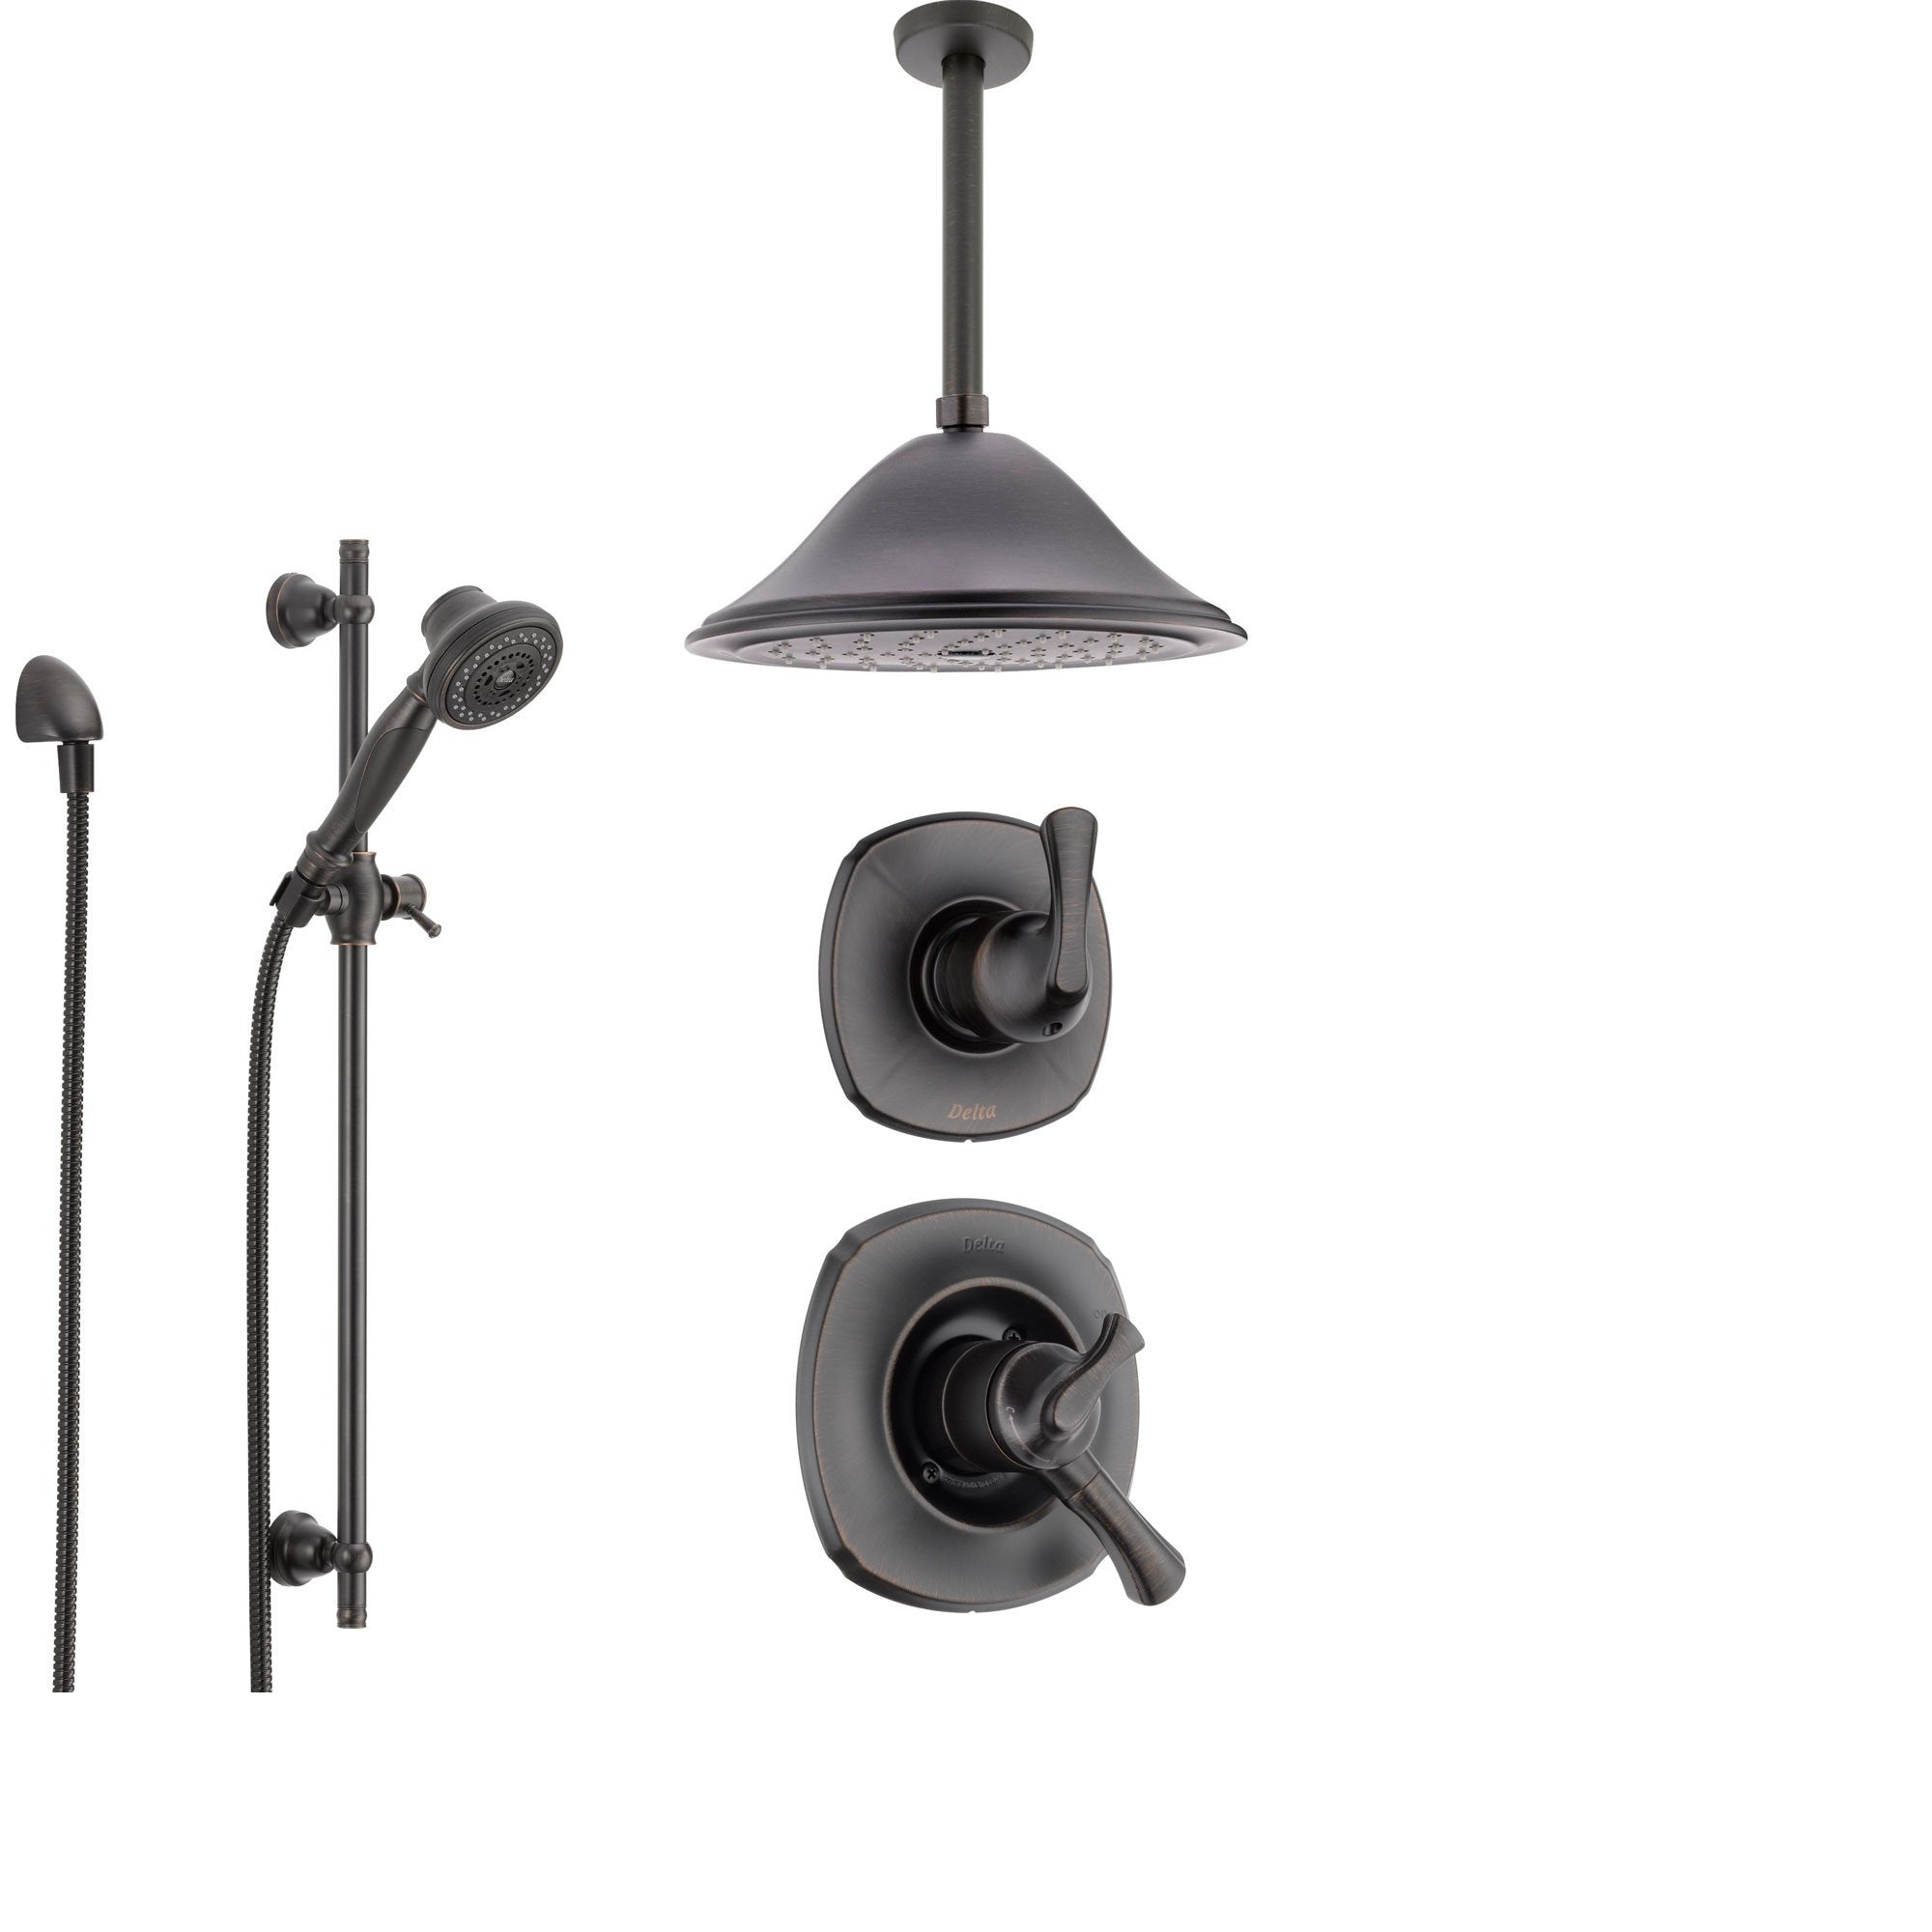 Delta Addison Venetian Bronze Shower System with Dual Control Shower Handle, 3-setting Diverter, Large Ceiling Mount Rain Showerhead, and Handheld Shower SS179282RB